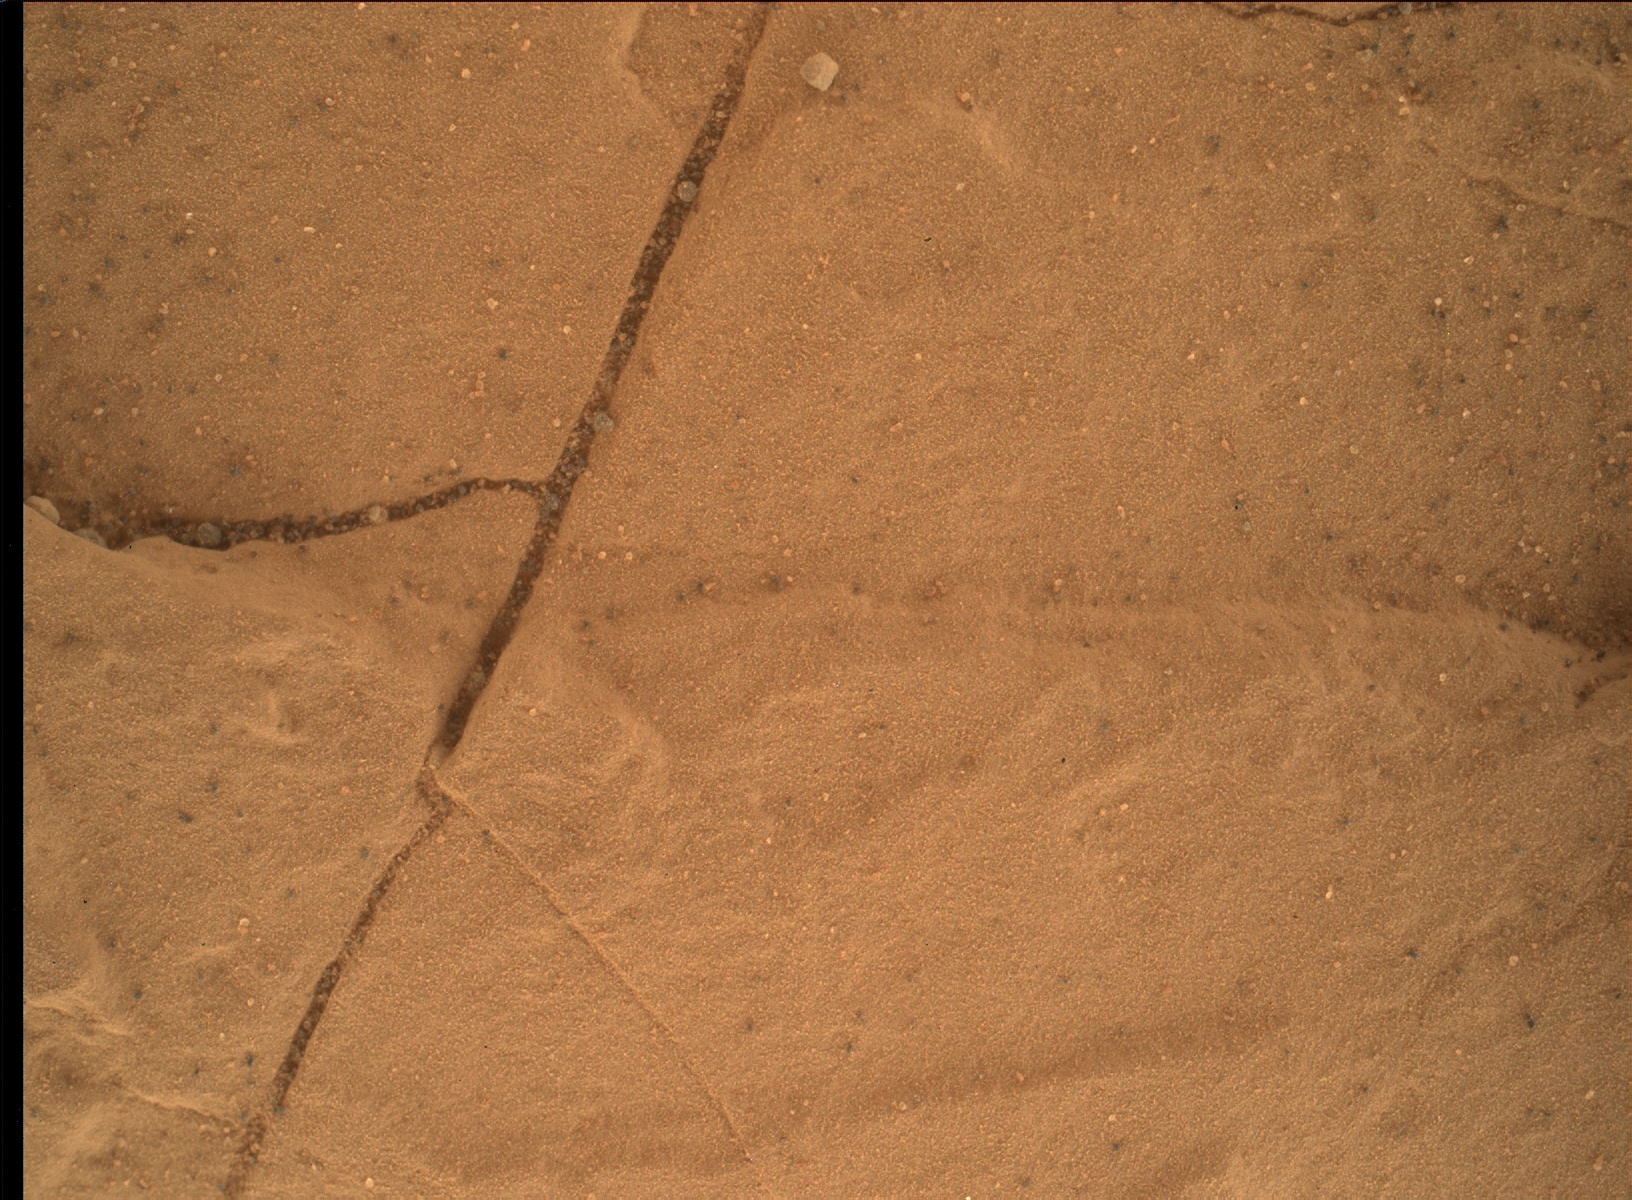 Nasa's Mars rover Curiosity acquired this image using its Mars Hand Lens Imager (MAHLI) on Sol 1719